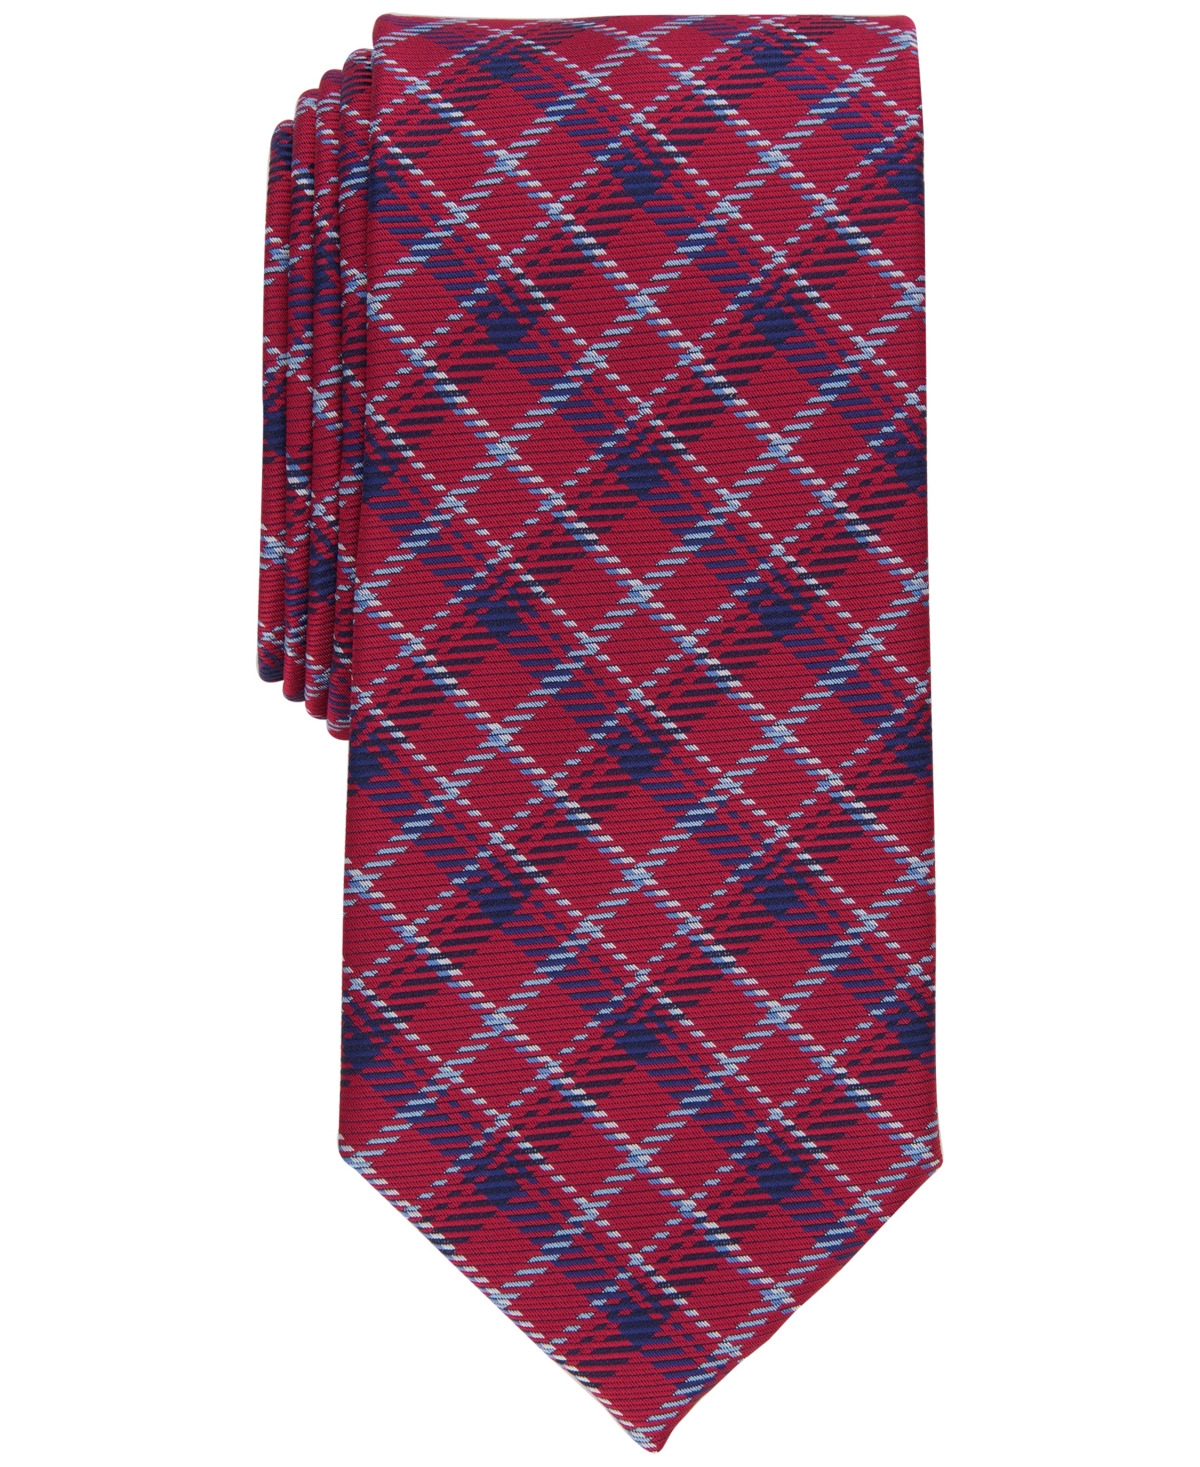 Men's Rivington Plaid Tie, Created for Macy's - Red